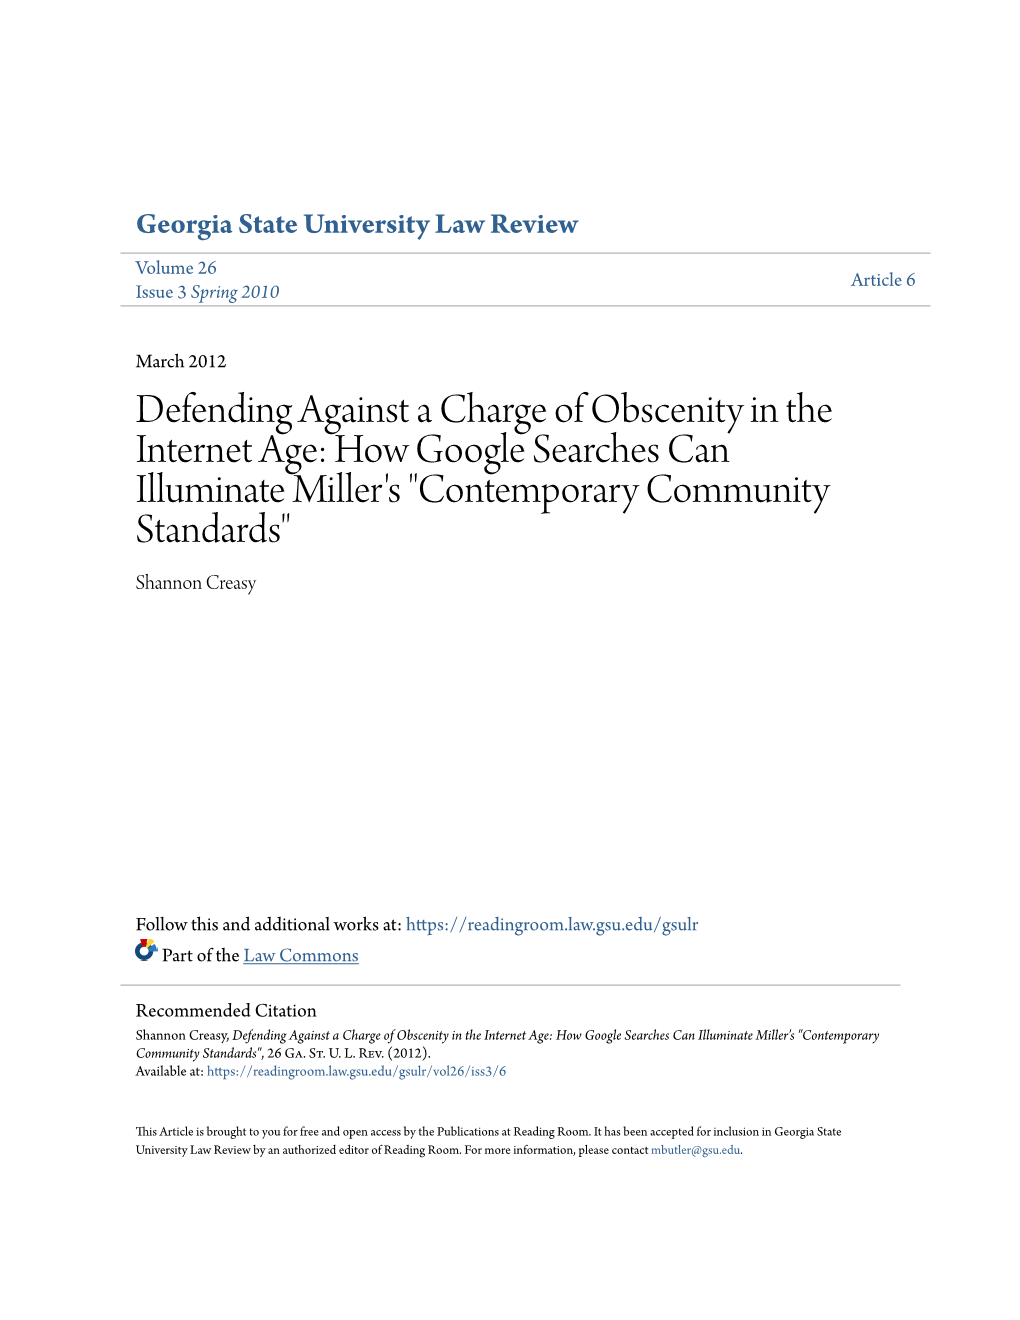 Defending Against a Charge of Obscenity in the Internet Age: How Google Searches Can Illuminate Miller's "Contemporary Community Standards" Shannon Creasy